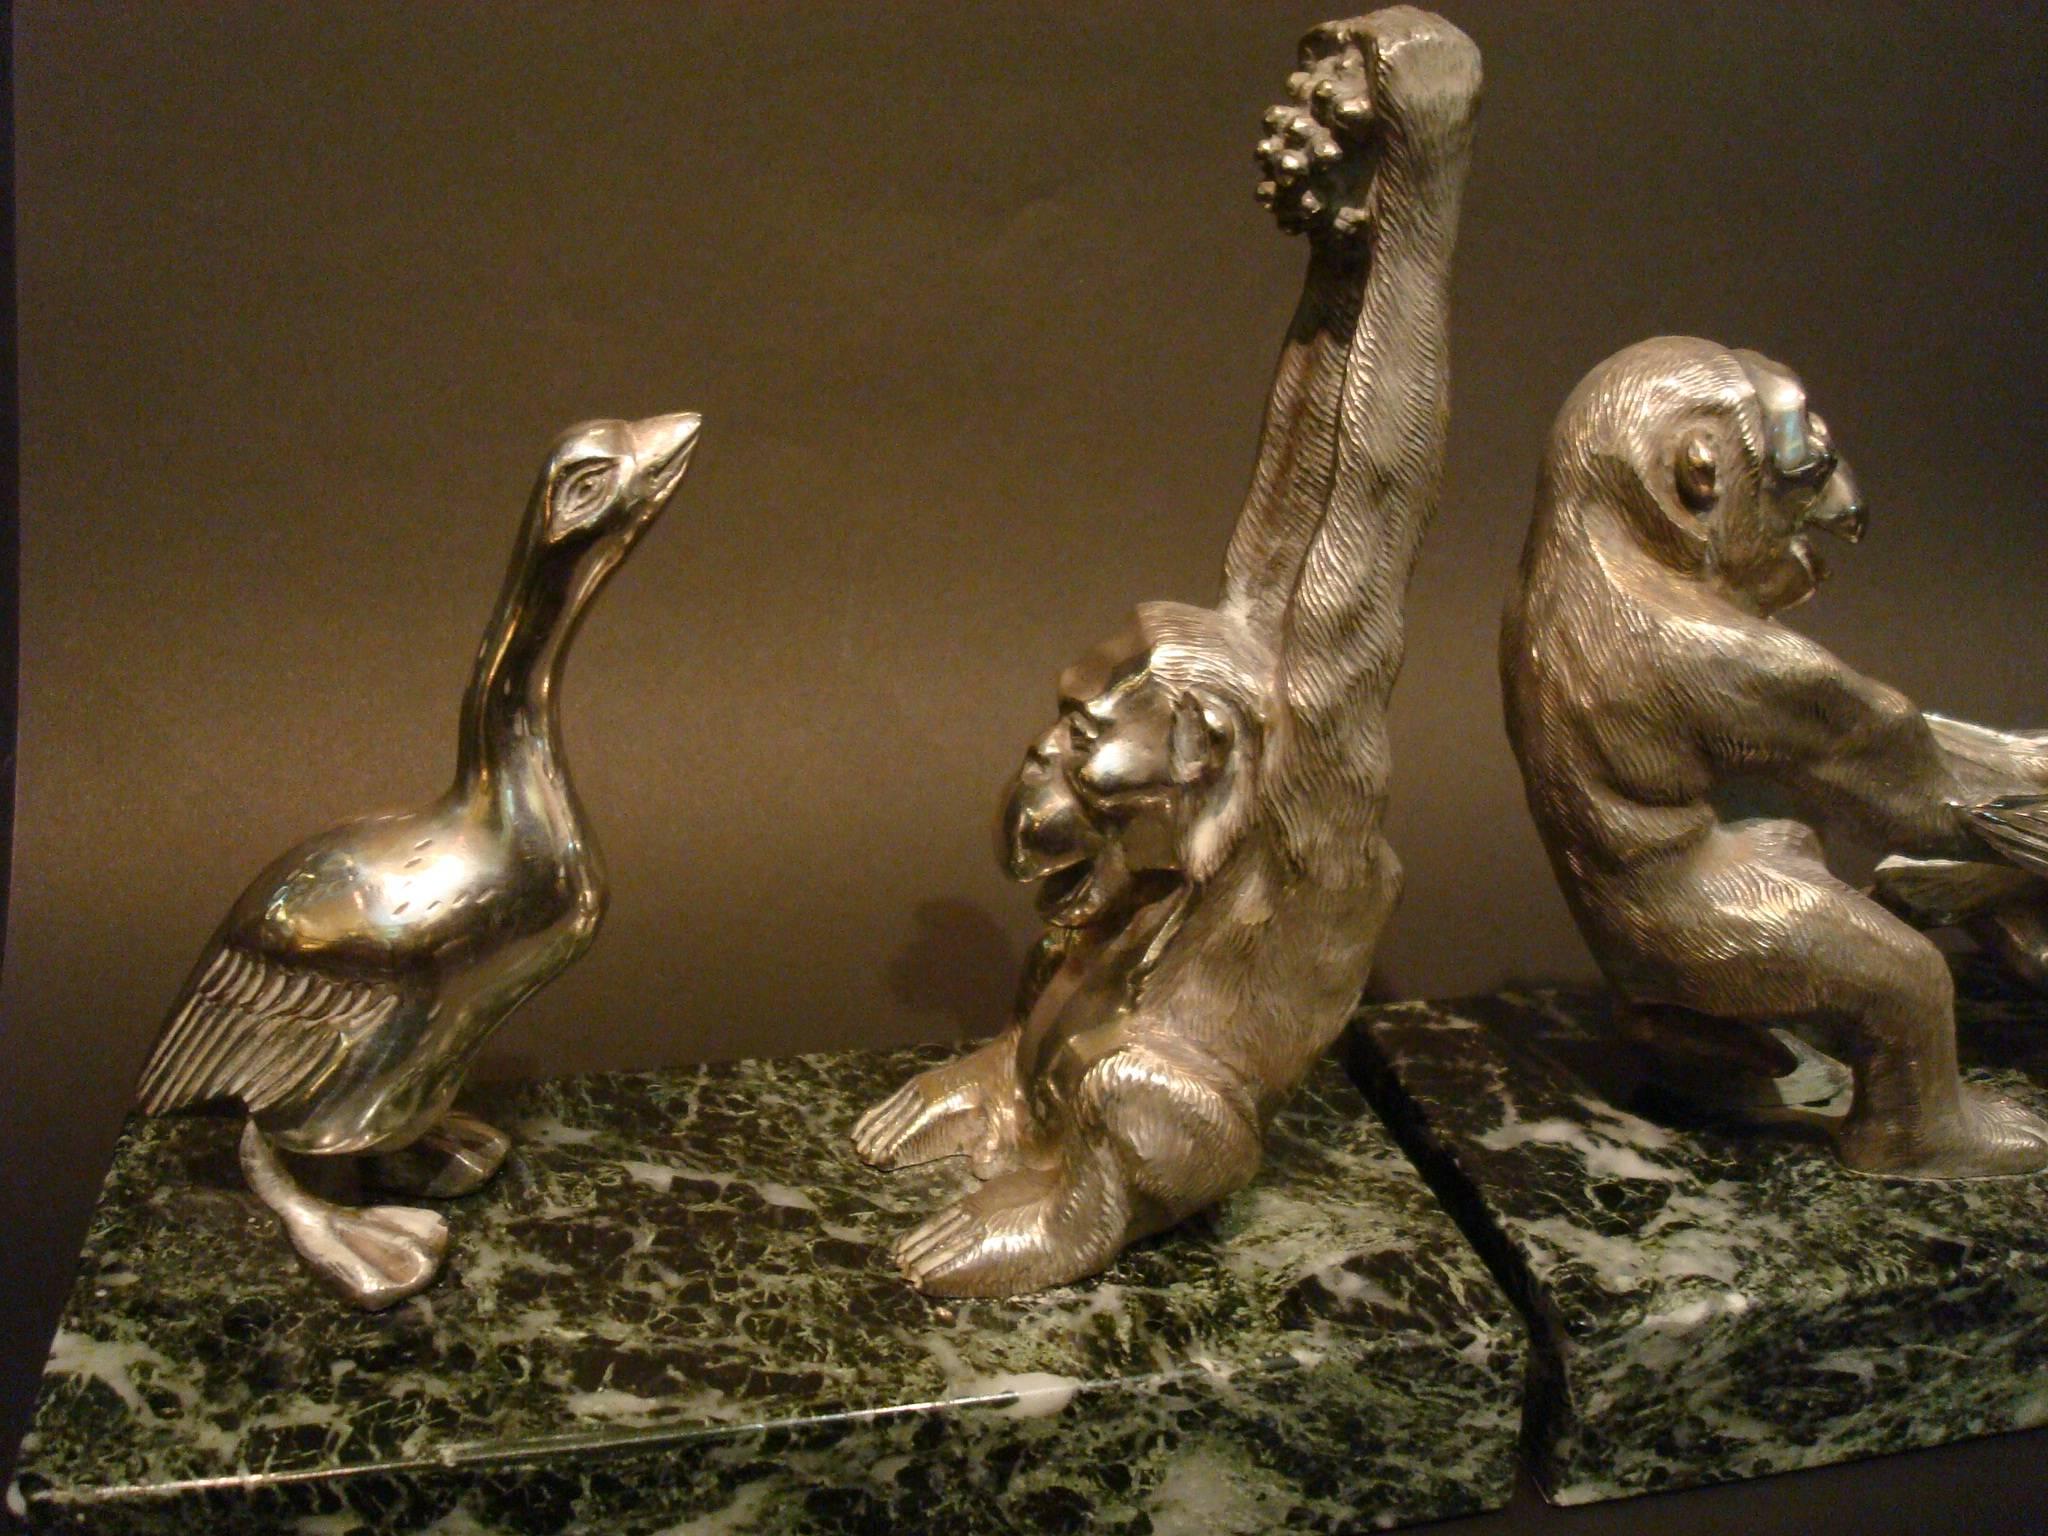 Art Deco silvered bronze monkey and goose bookends by Becquerel.
A pair of Art Deco silvered bronze monkey and goose bookends by Becquerel,
circa 1930. Each with a monkey teasing a goose, on a marble base, stamped 'Becquerel, France'.
Similar